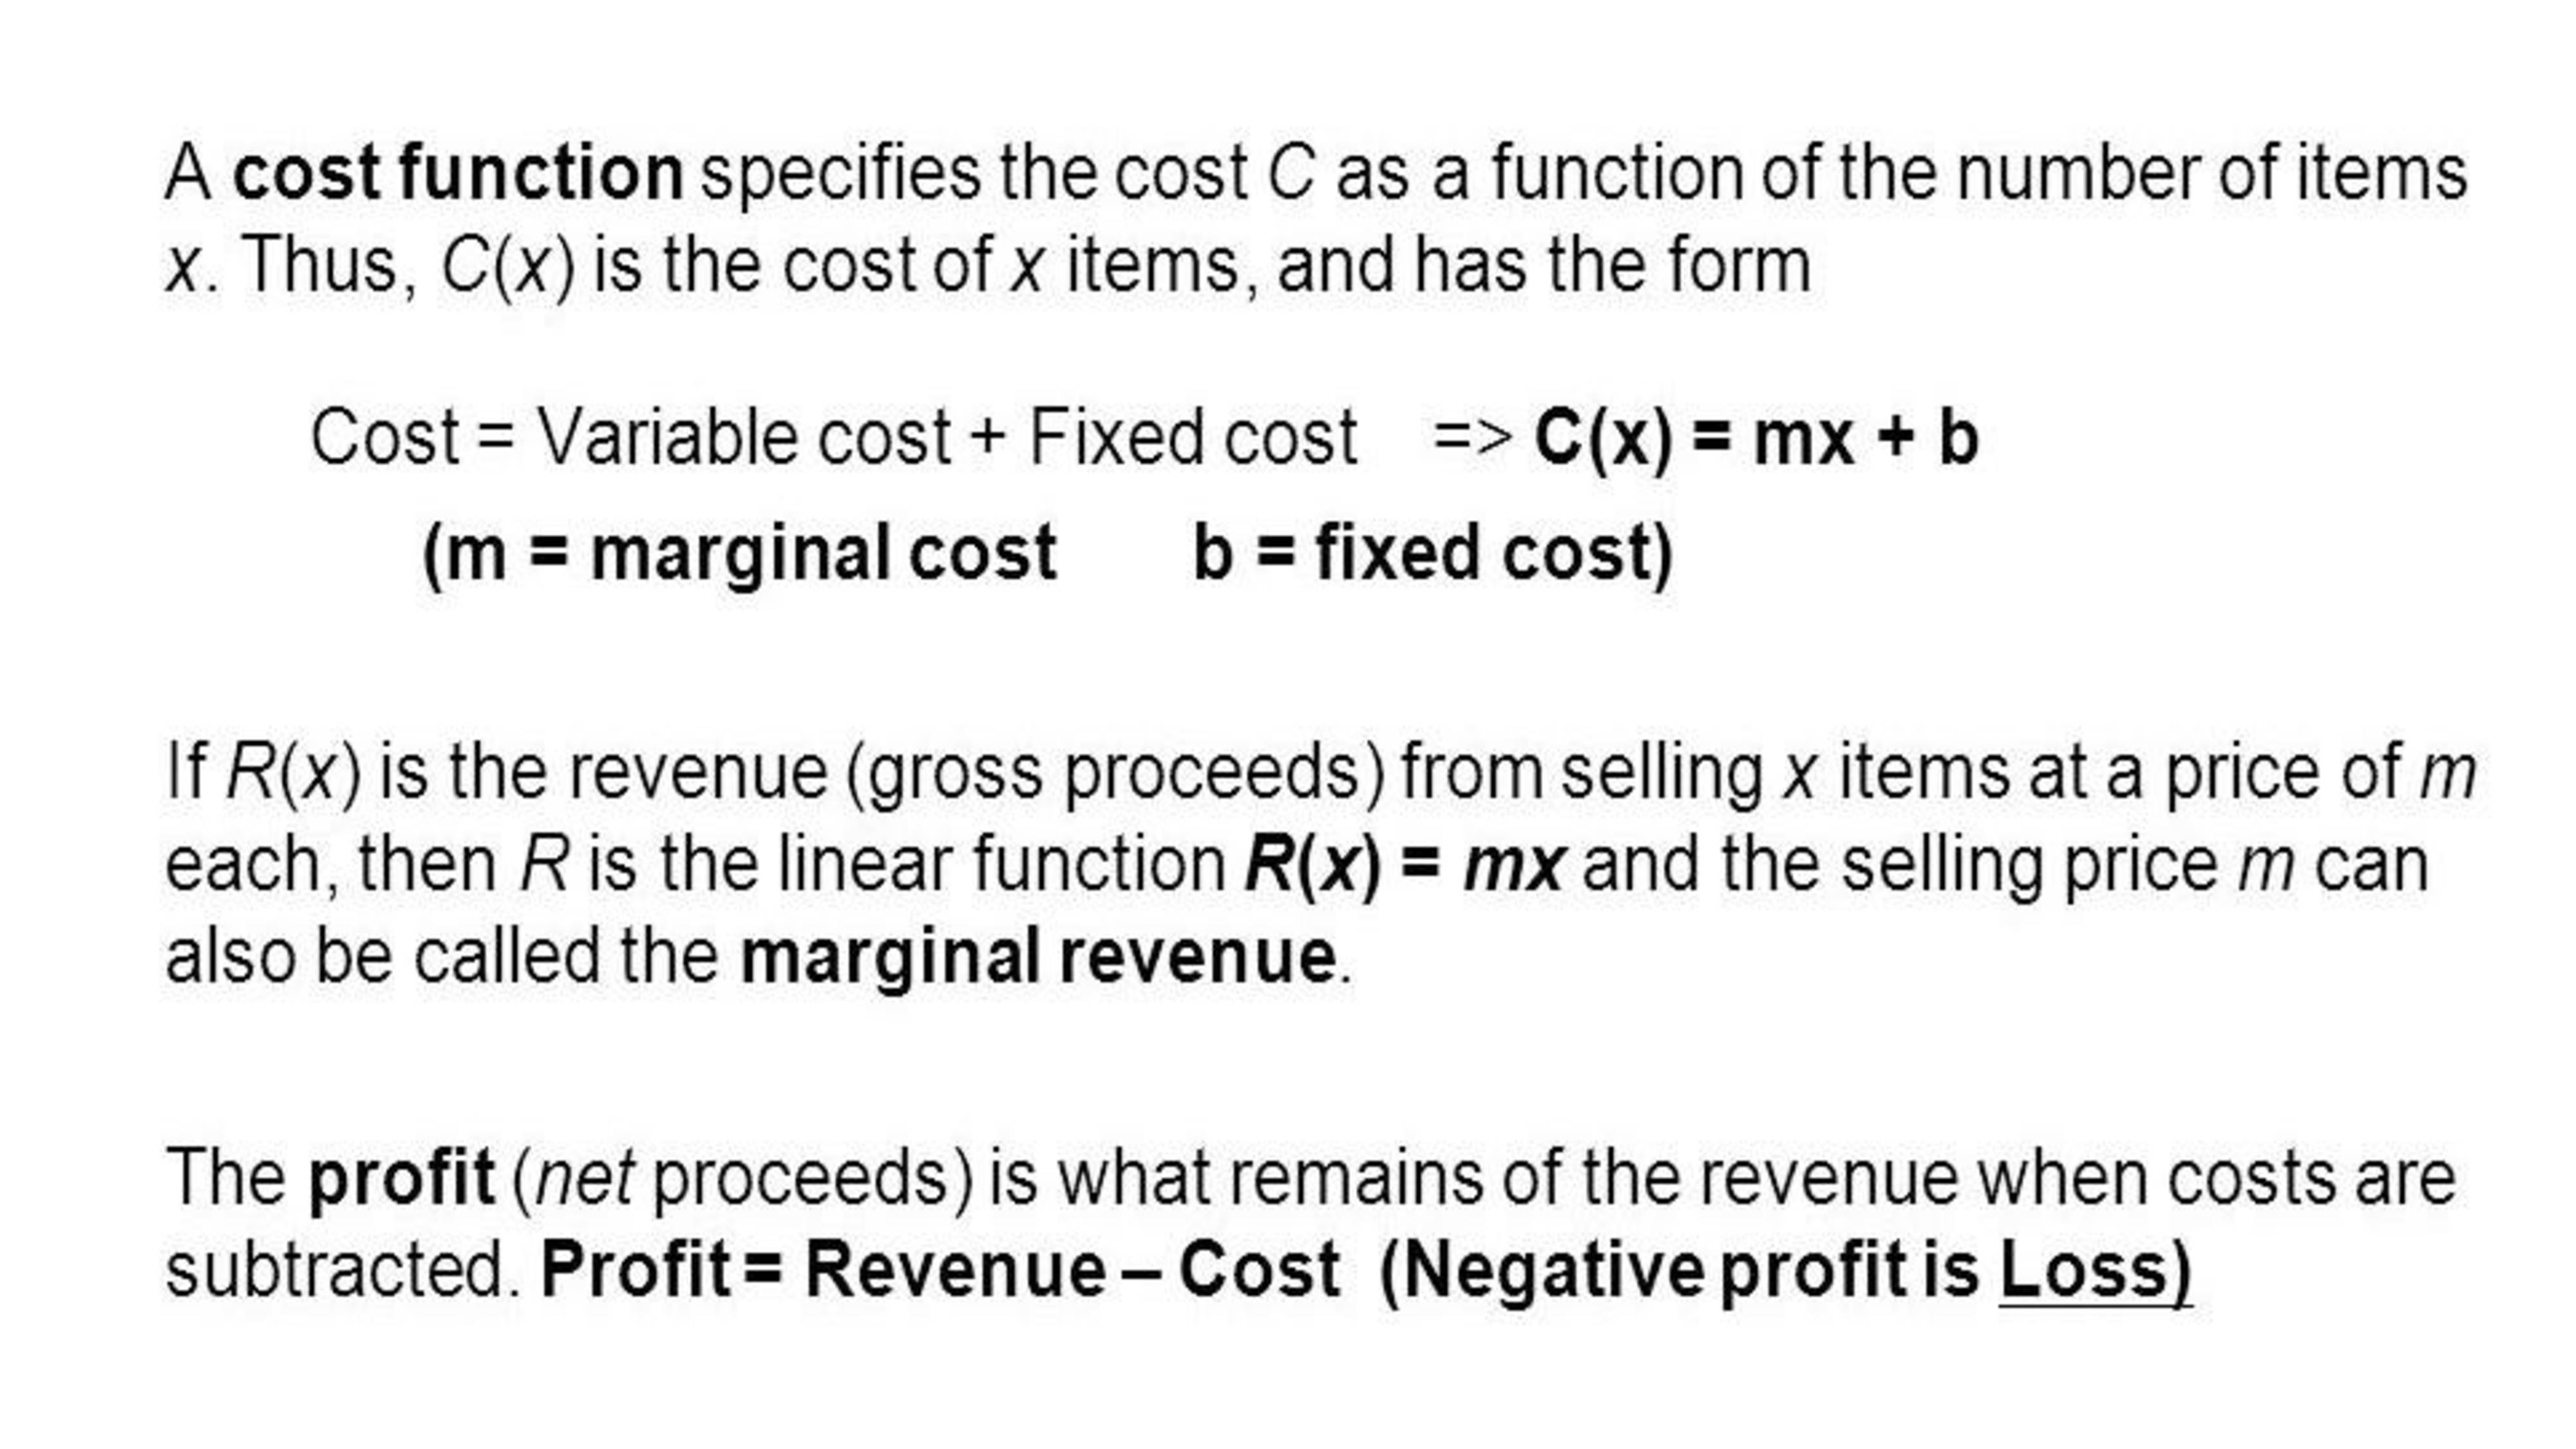 PPt on Cost and Business